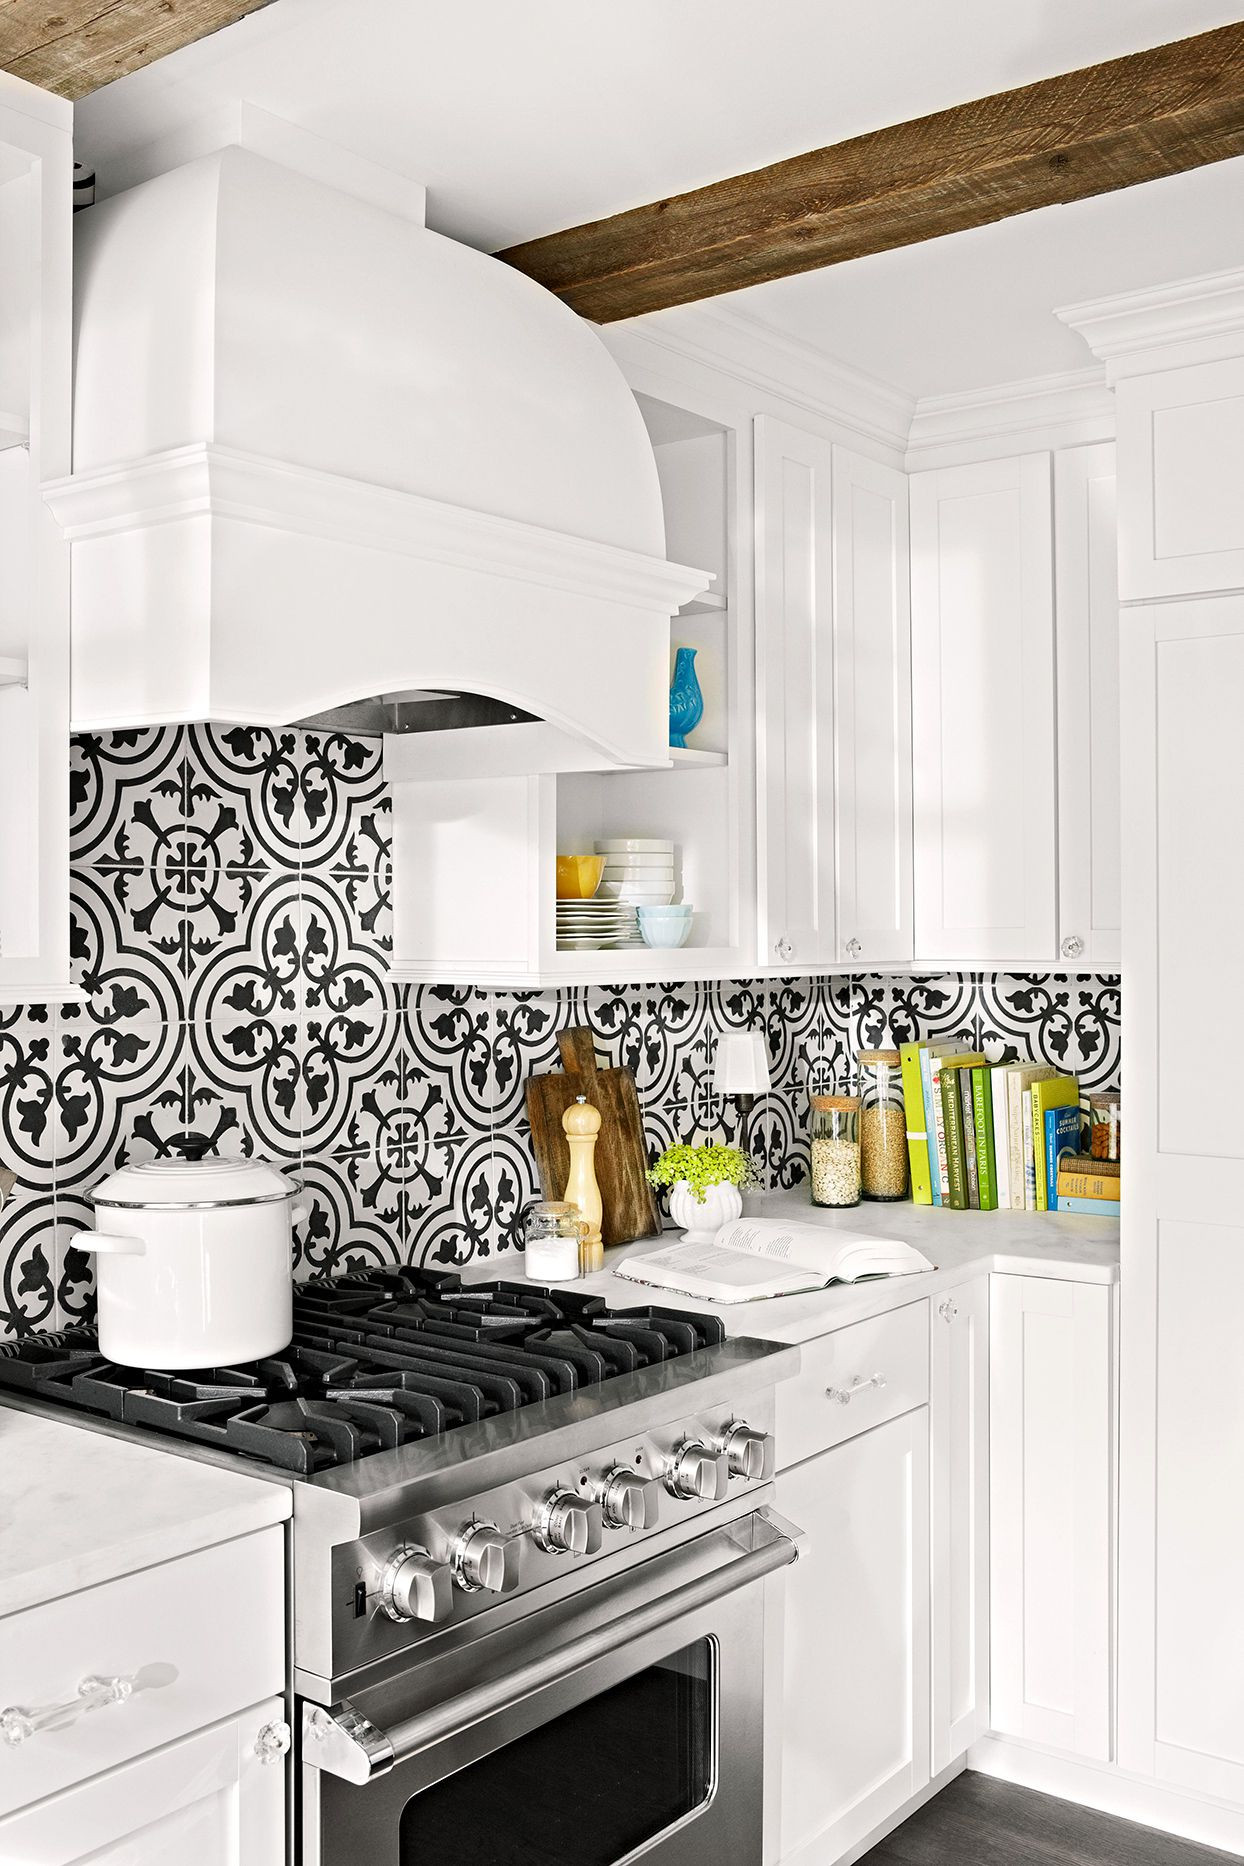 Budget-Friendly Backsplash Ideas that Only Look Expensive